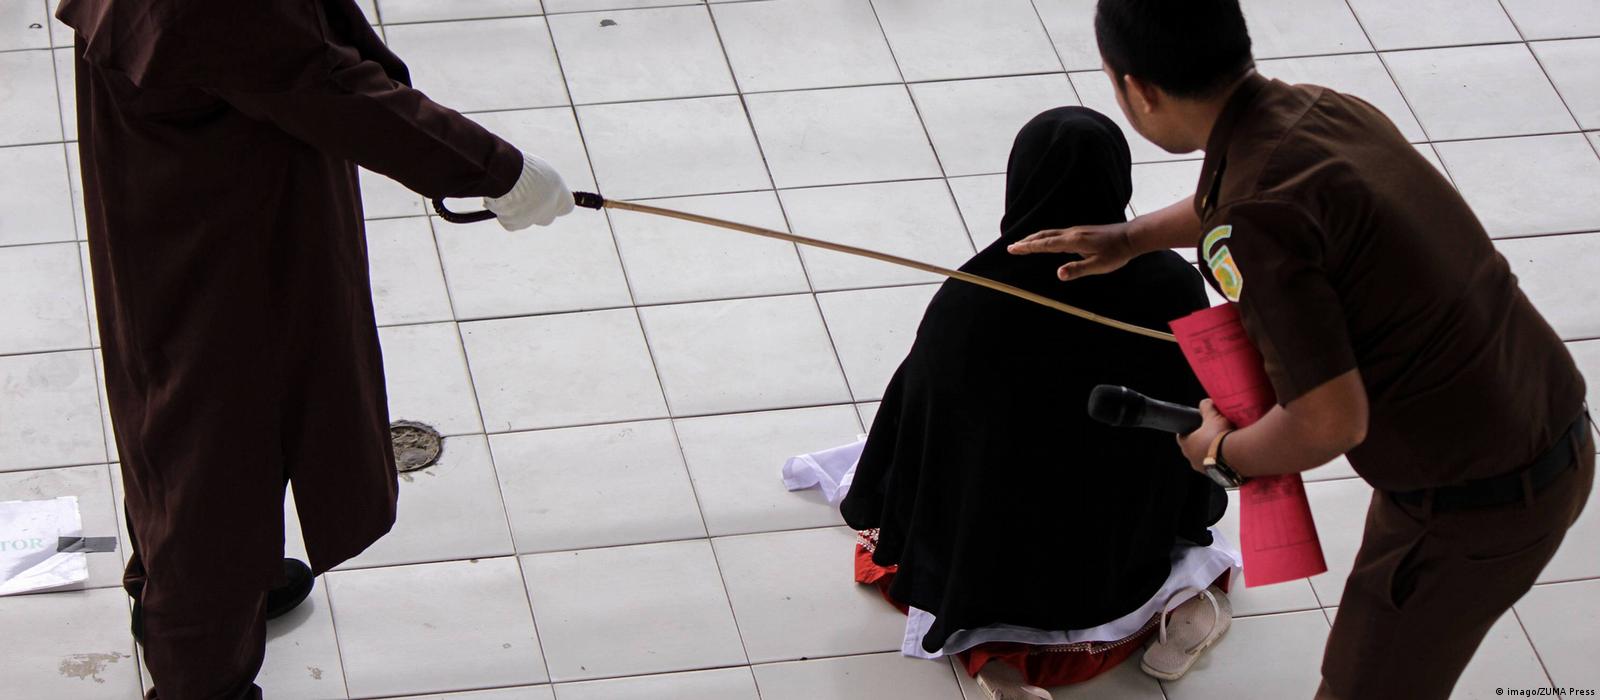 Two Malaysian women caned for same-sex relations – DW